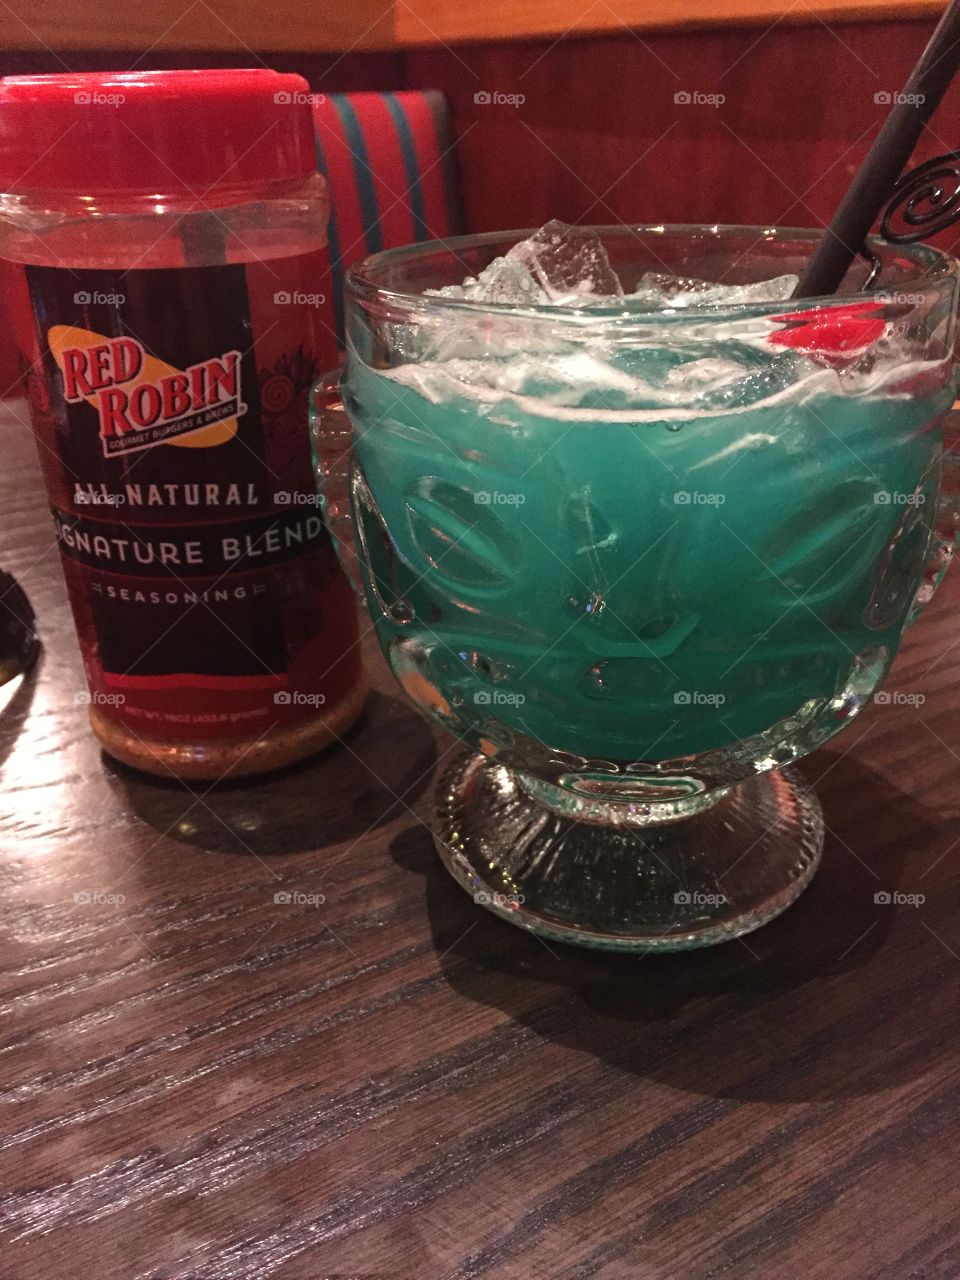 Tiki God. Dinner and drinks at our favorite Red Robin